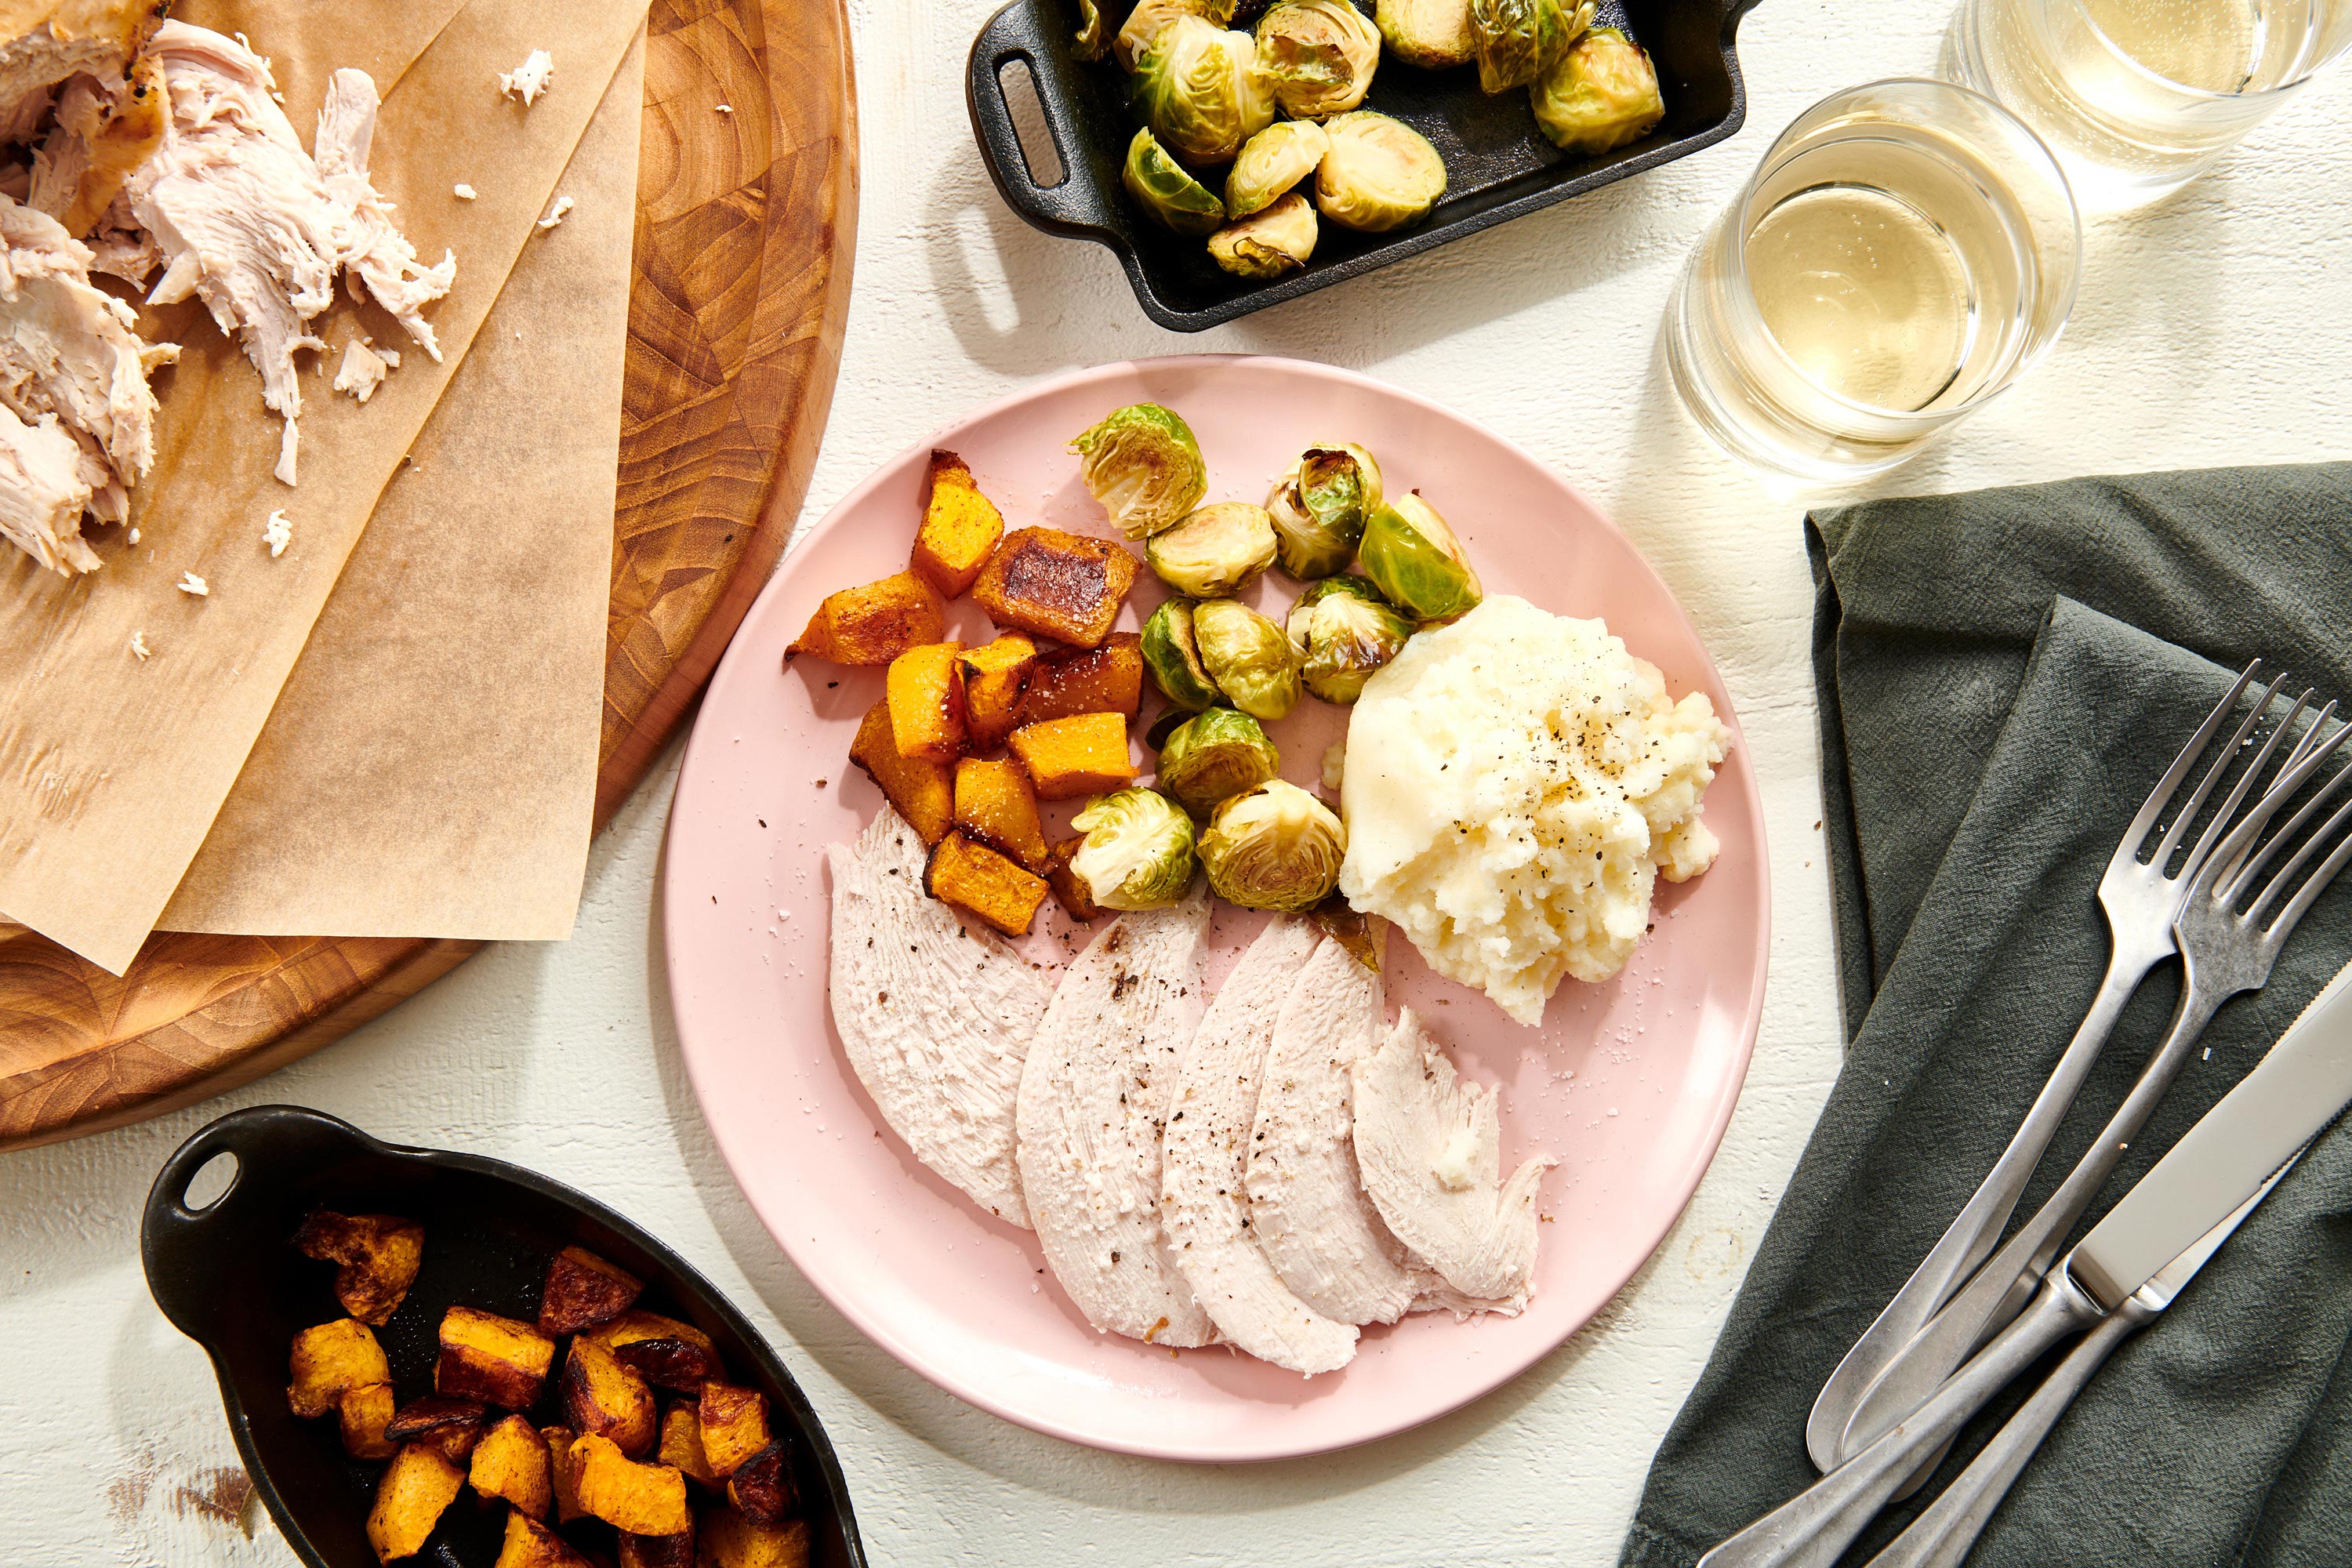 Pink plate with brussels sprouts, sweet potato, mashed potatoes, and Turkey Breast.